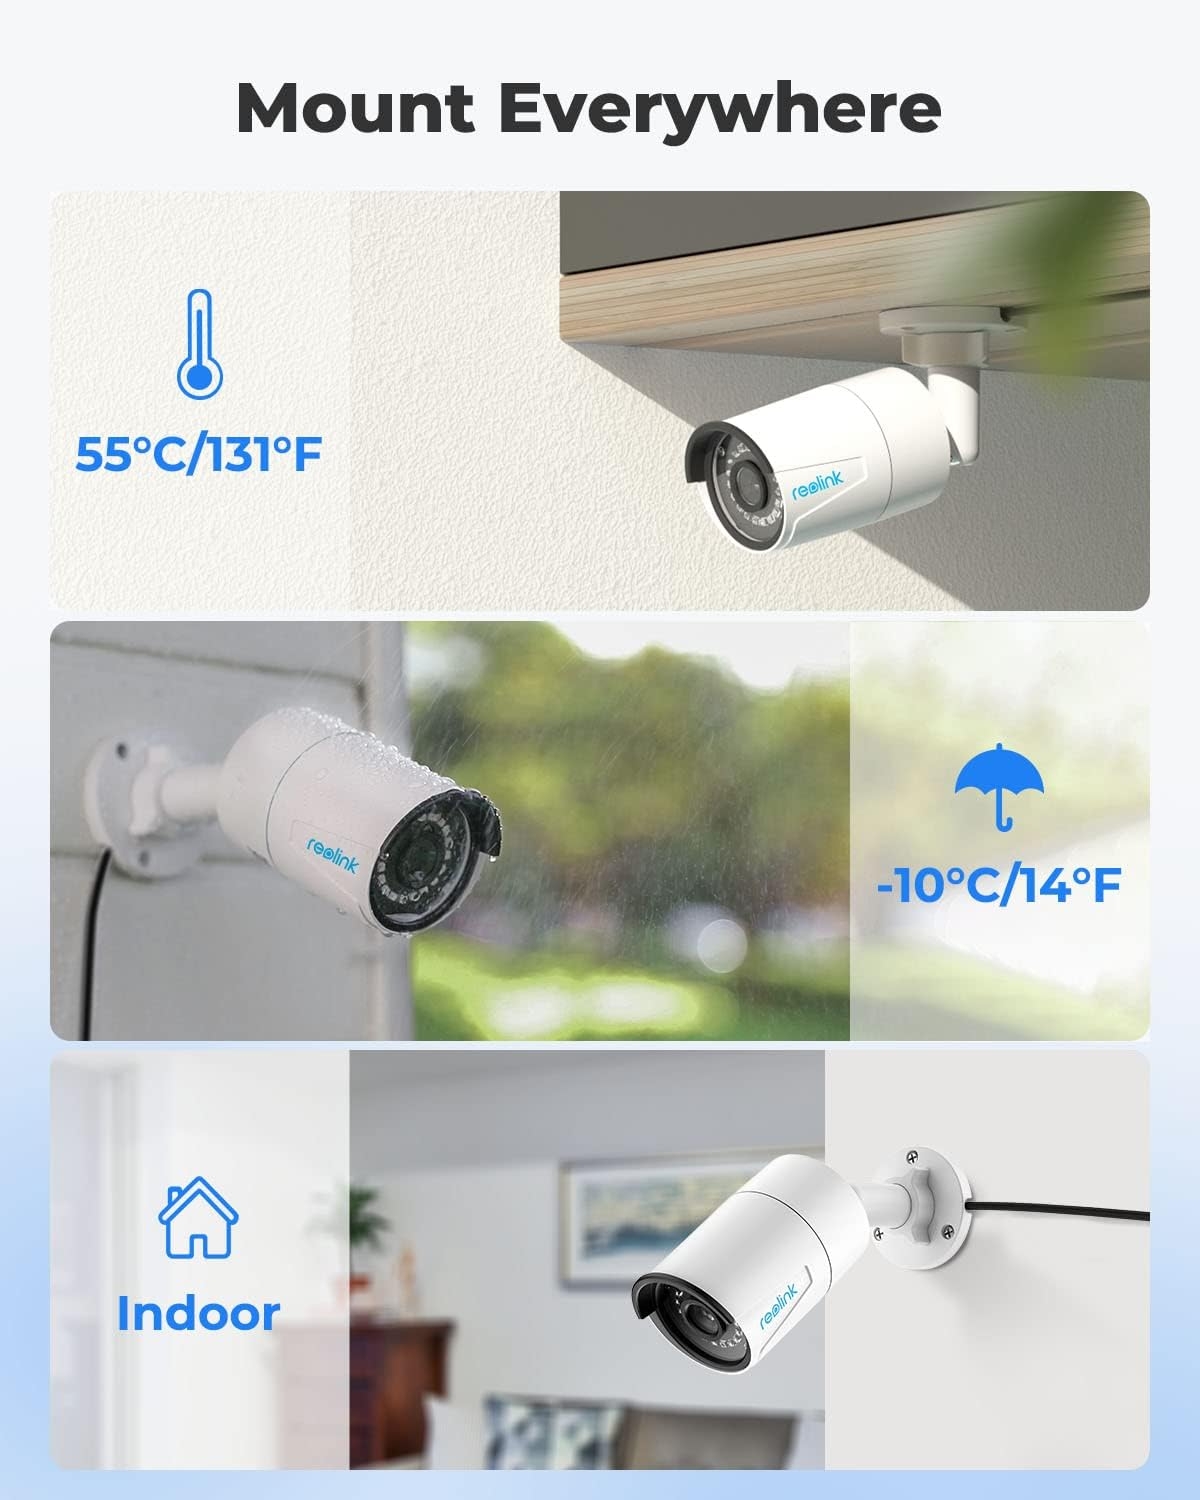 REOLINK 5MP PoE Camera (Pack of 2) Outdoor/Indoor IP Security Surveillance, IP66 Waterproof, 100ft IR Night Vision, Motion Detection, Work with Smart Home, Support Up to 128GB SD Card, RLC-410-5MP